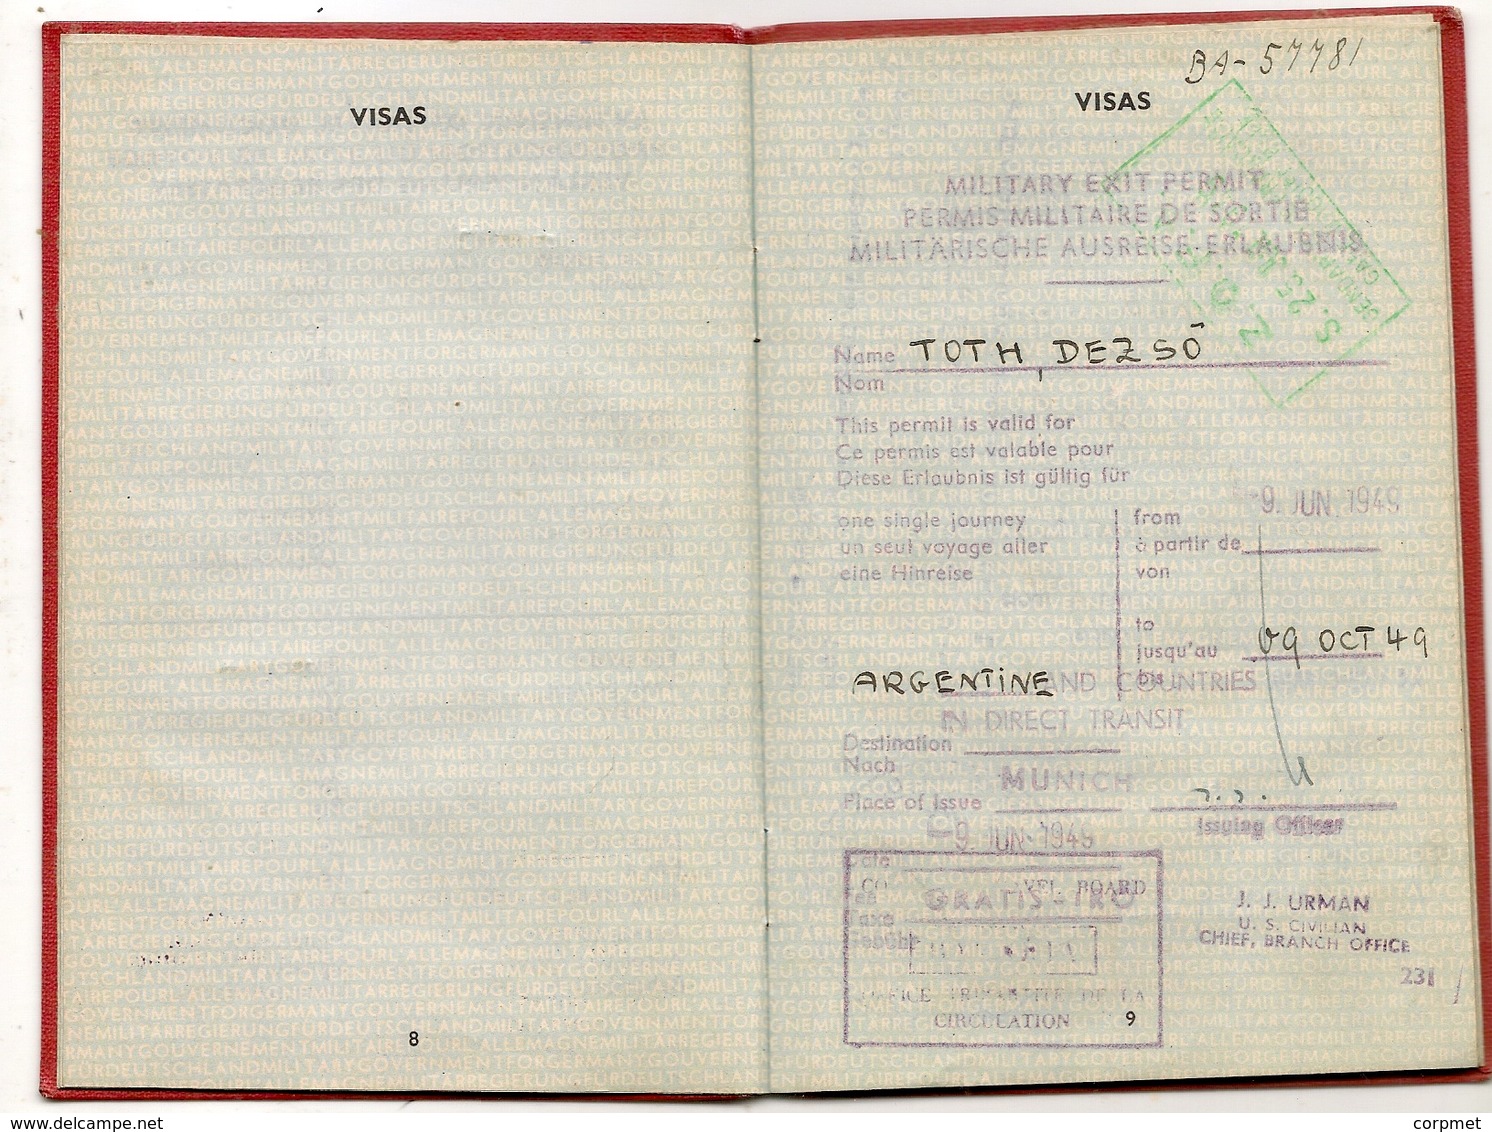 MILITARY GOVERNMENT FOR GERMANY 1949 -PASSPORT - PASSEPORT For Hungarian TOTH DEZSO Exit Permit To ARGENTINA -NOT COMMON - Historische Dokumente